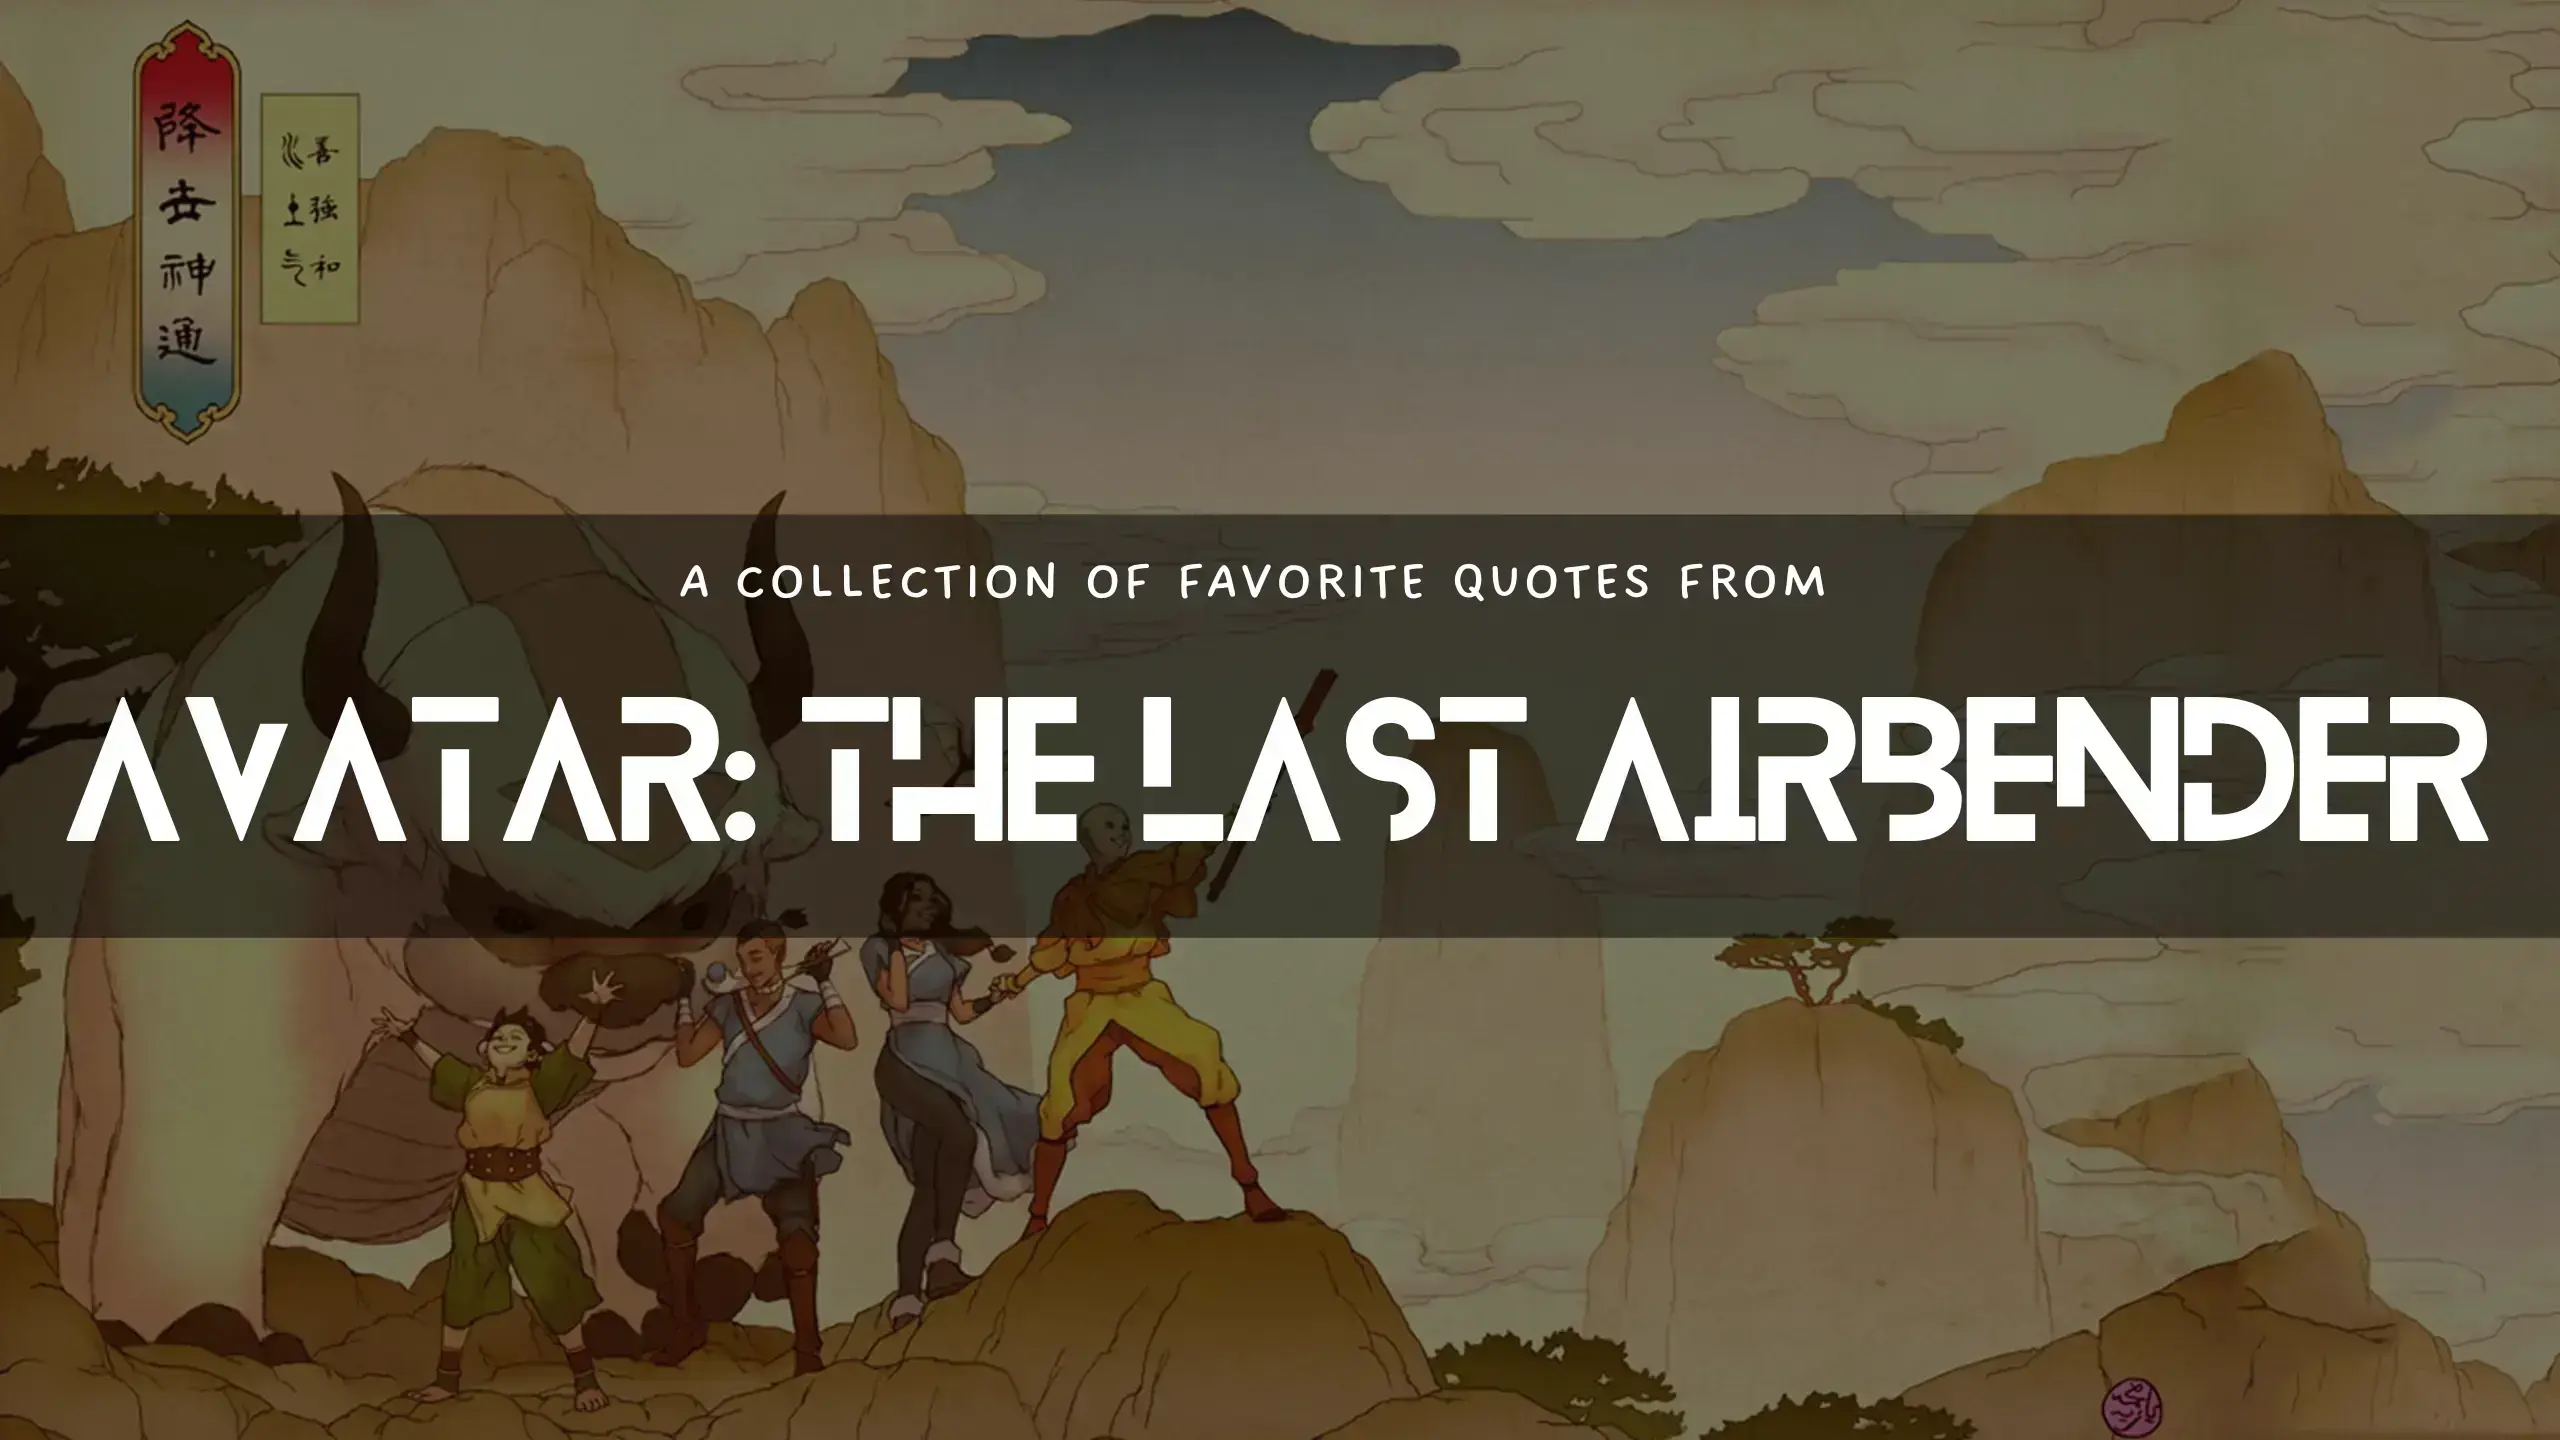 Awesome quotes from Avatar The Last Airbender